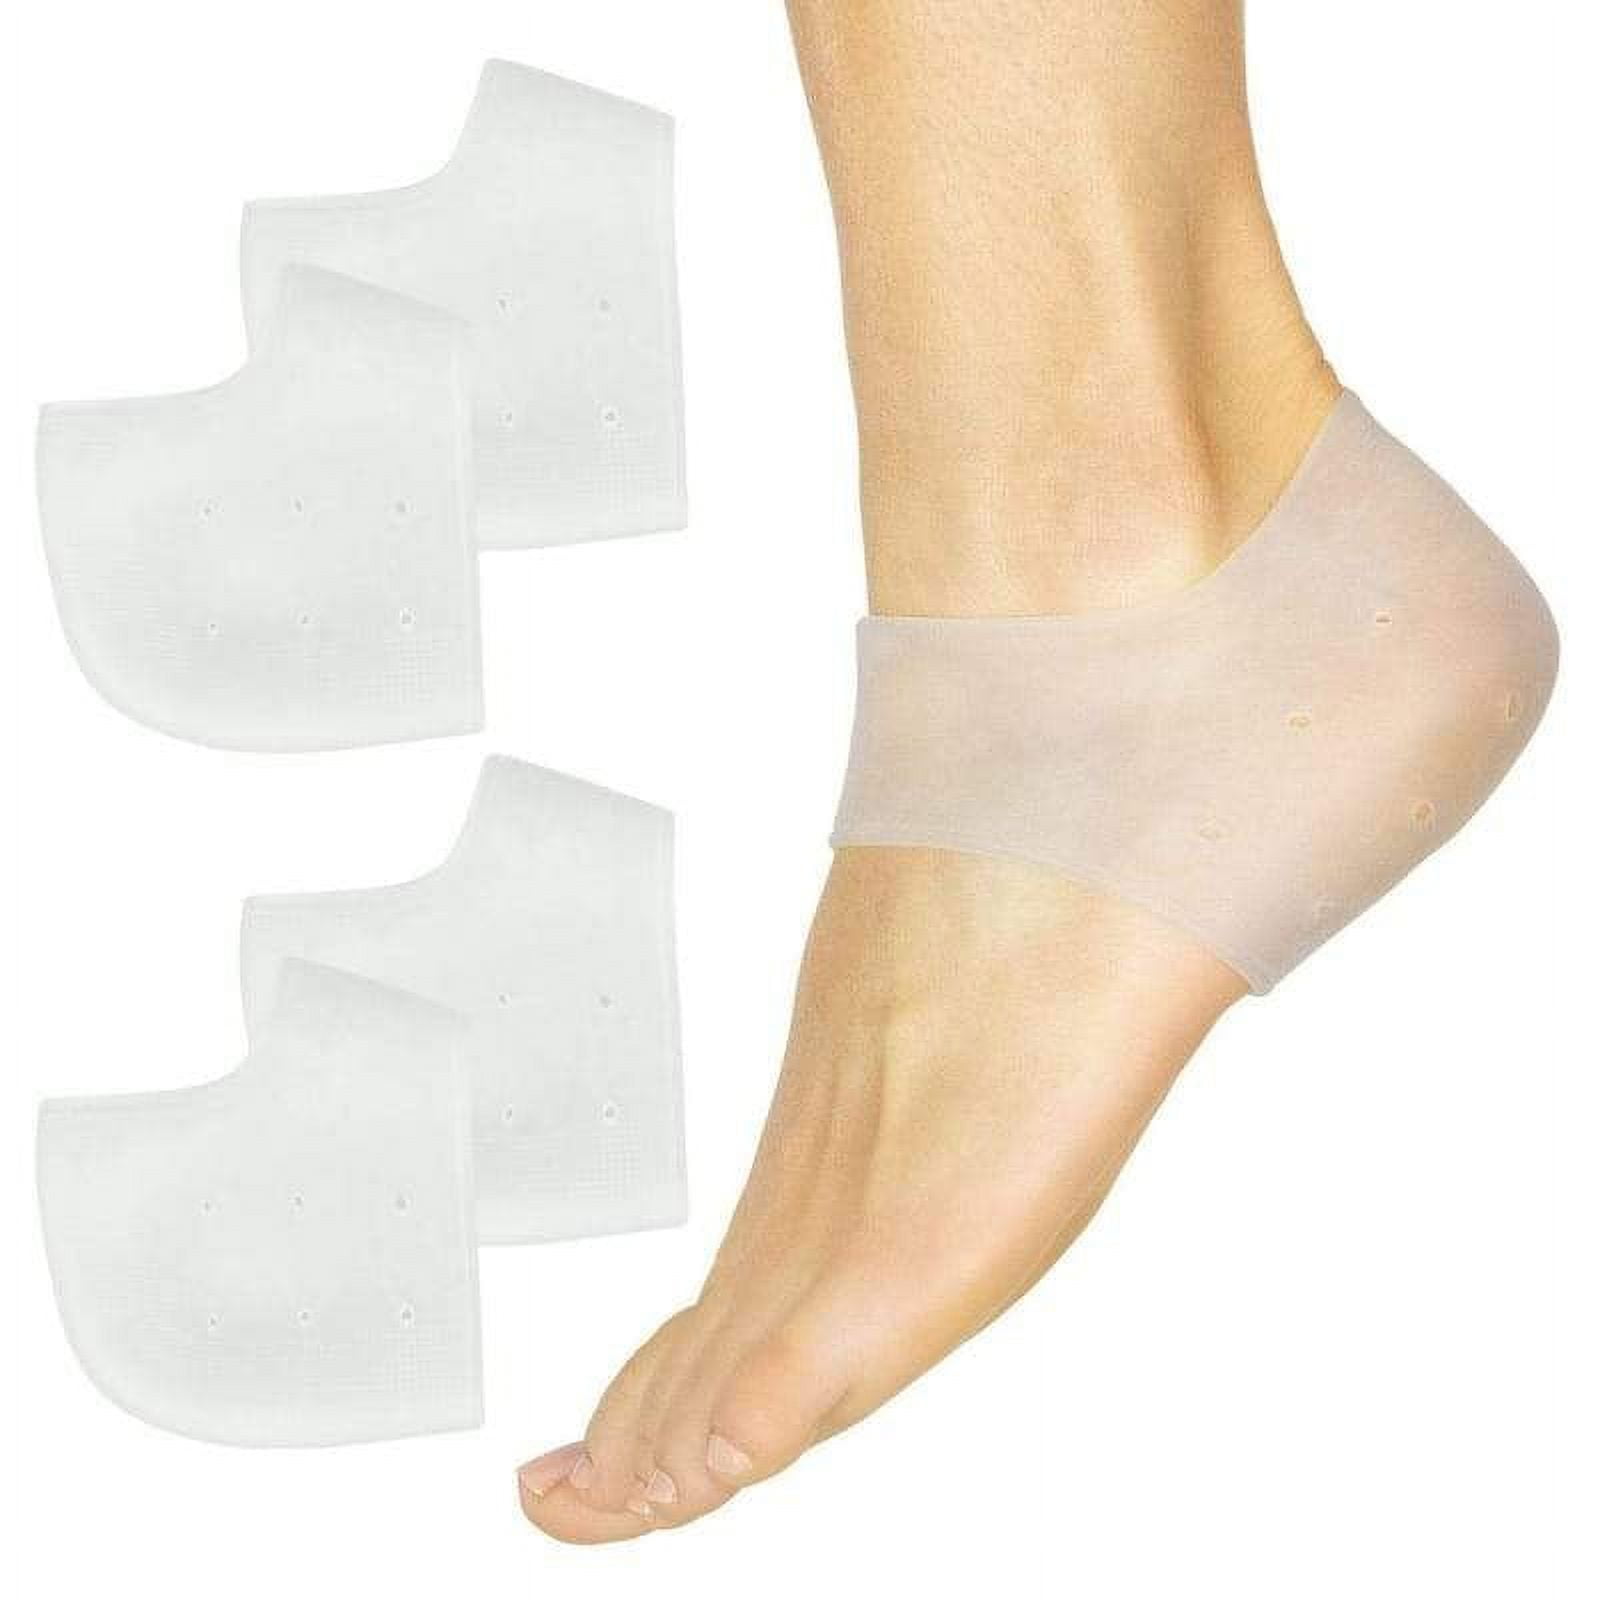 Waterproof Anti-wear Shoe Sticker Blister Prevention Foot Care Protection  Pad Thin Transparent Self-Adhesive Heel Non Wear Sticker Guard Skin from  Rubbing Shoes Blister Pads (150)